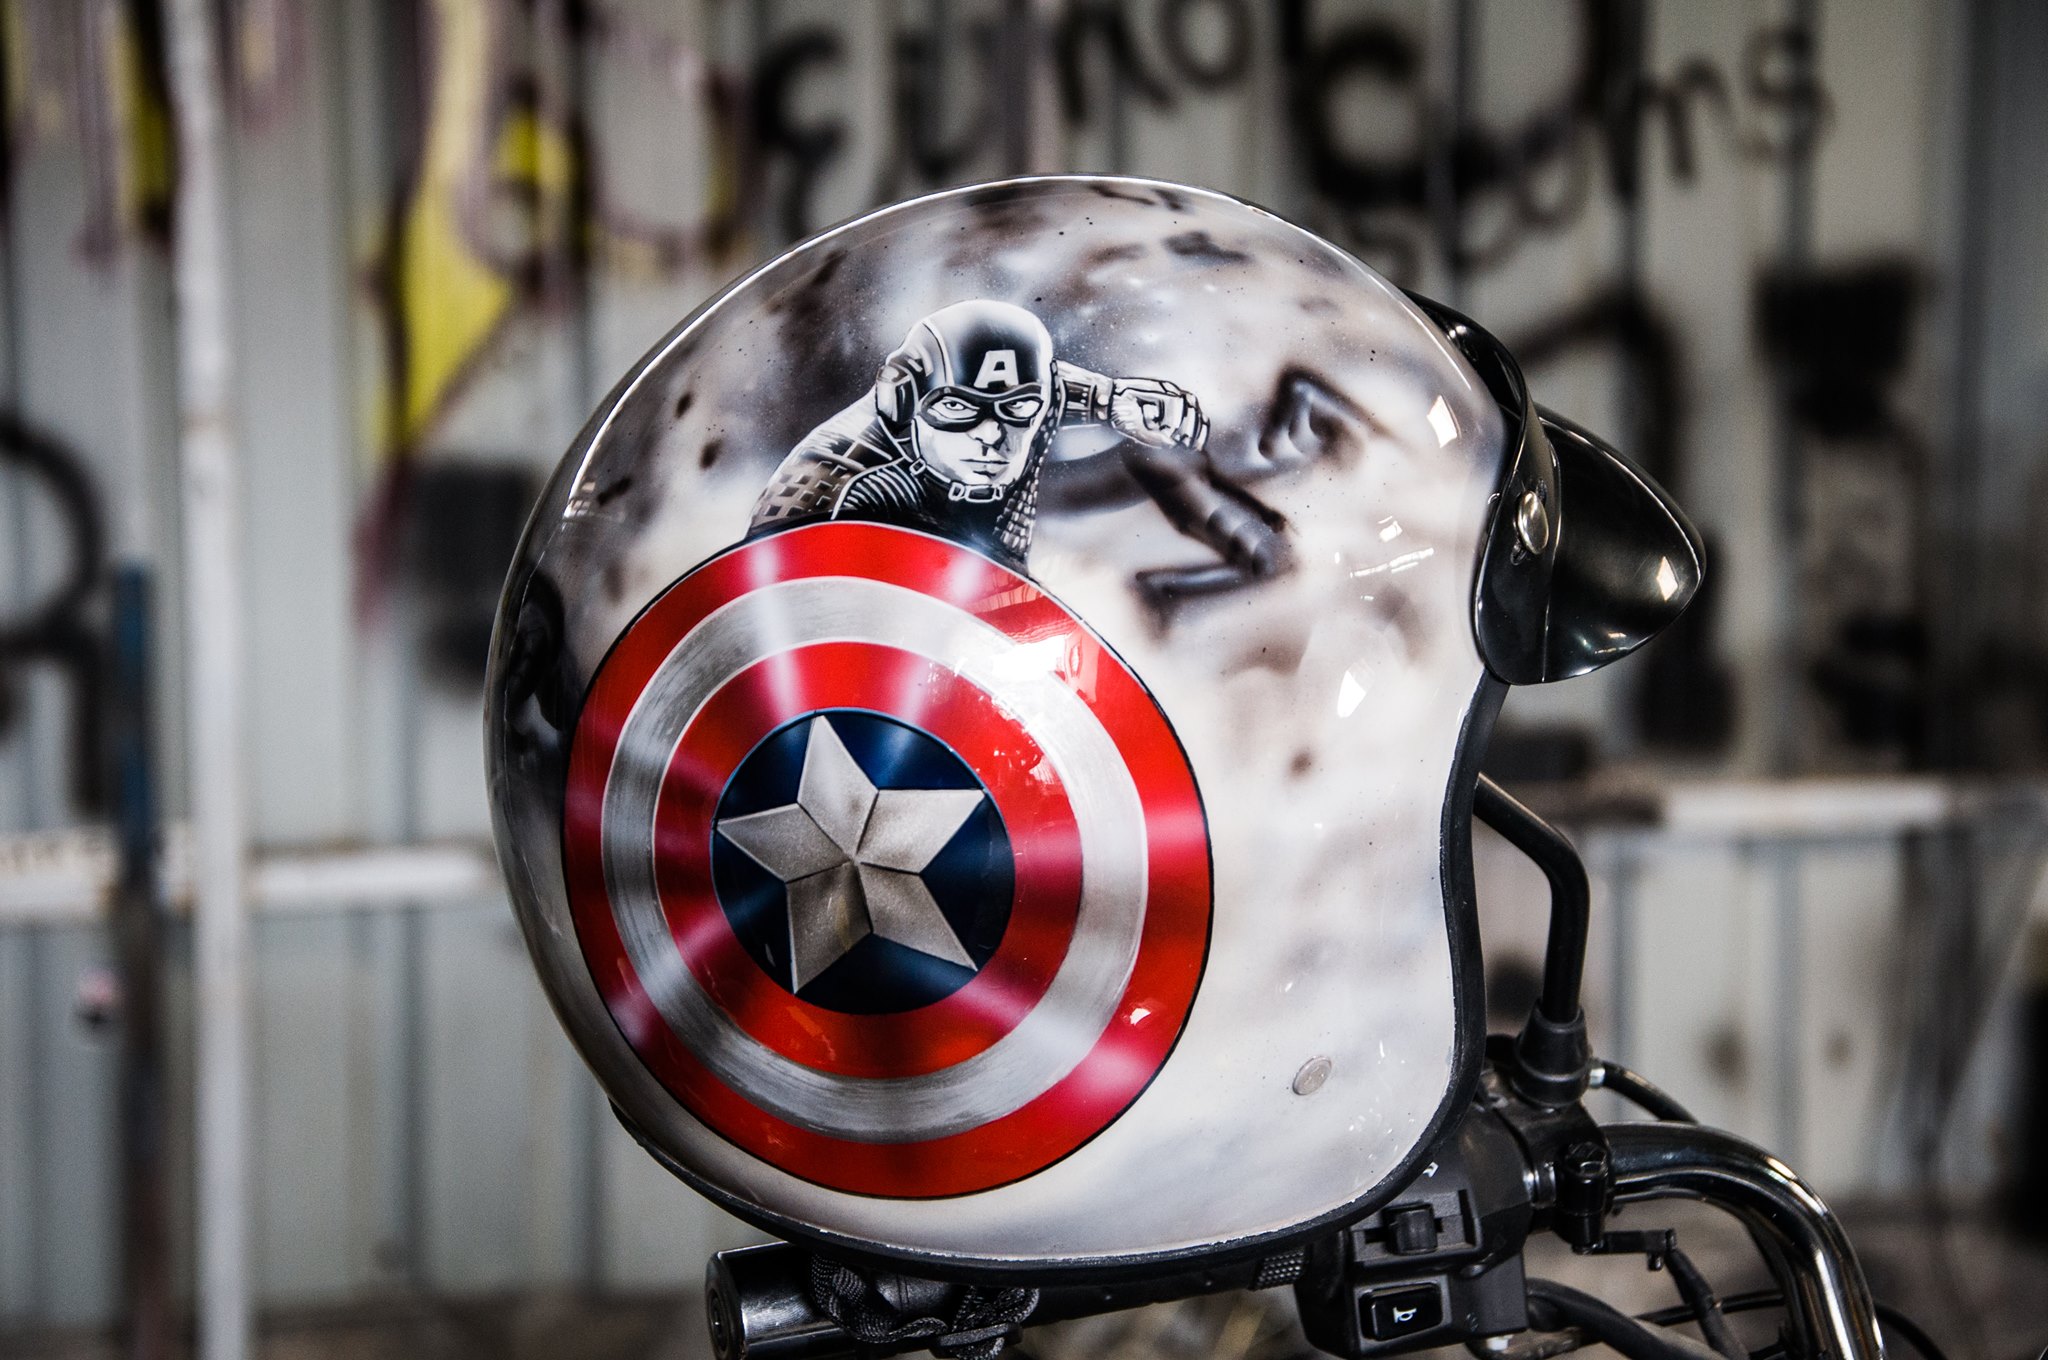 Top 10 Helmets by EIMOR - Black Panther, Breathe, The Lady Rider, Phantom, Captain America & More! - close-up